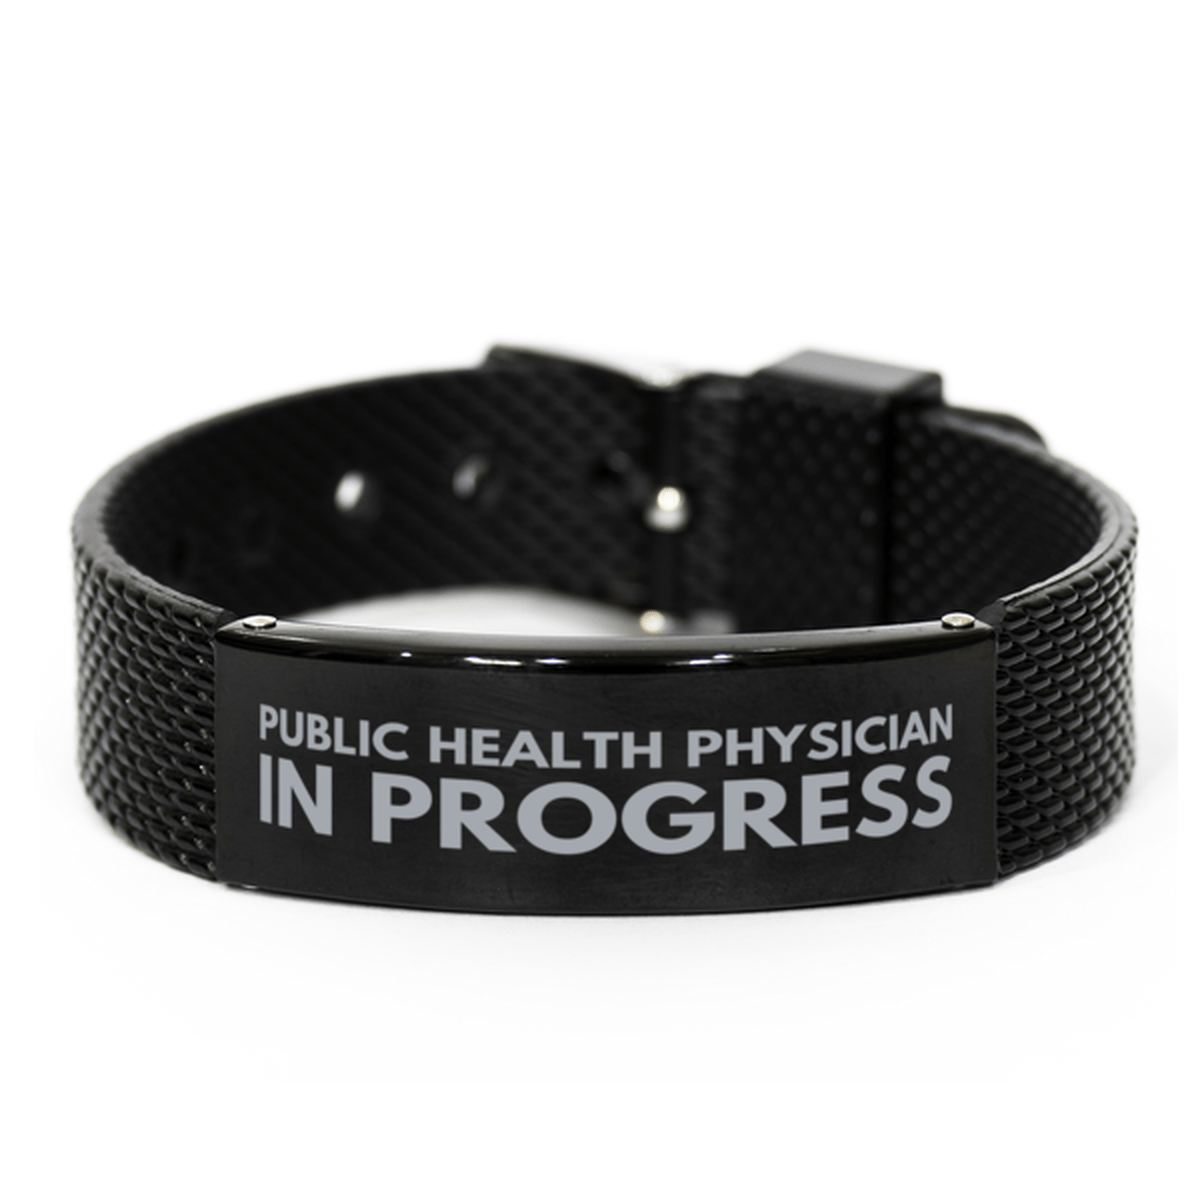 Inspirational Public Health Physician Black Shark Mesh Bracelet, Public Health Physician In Progress, Best Graduation Gifts for Students